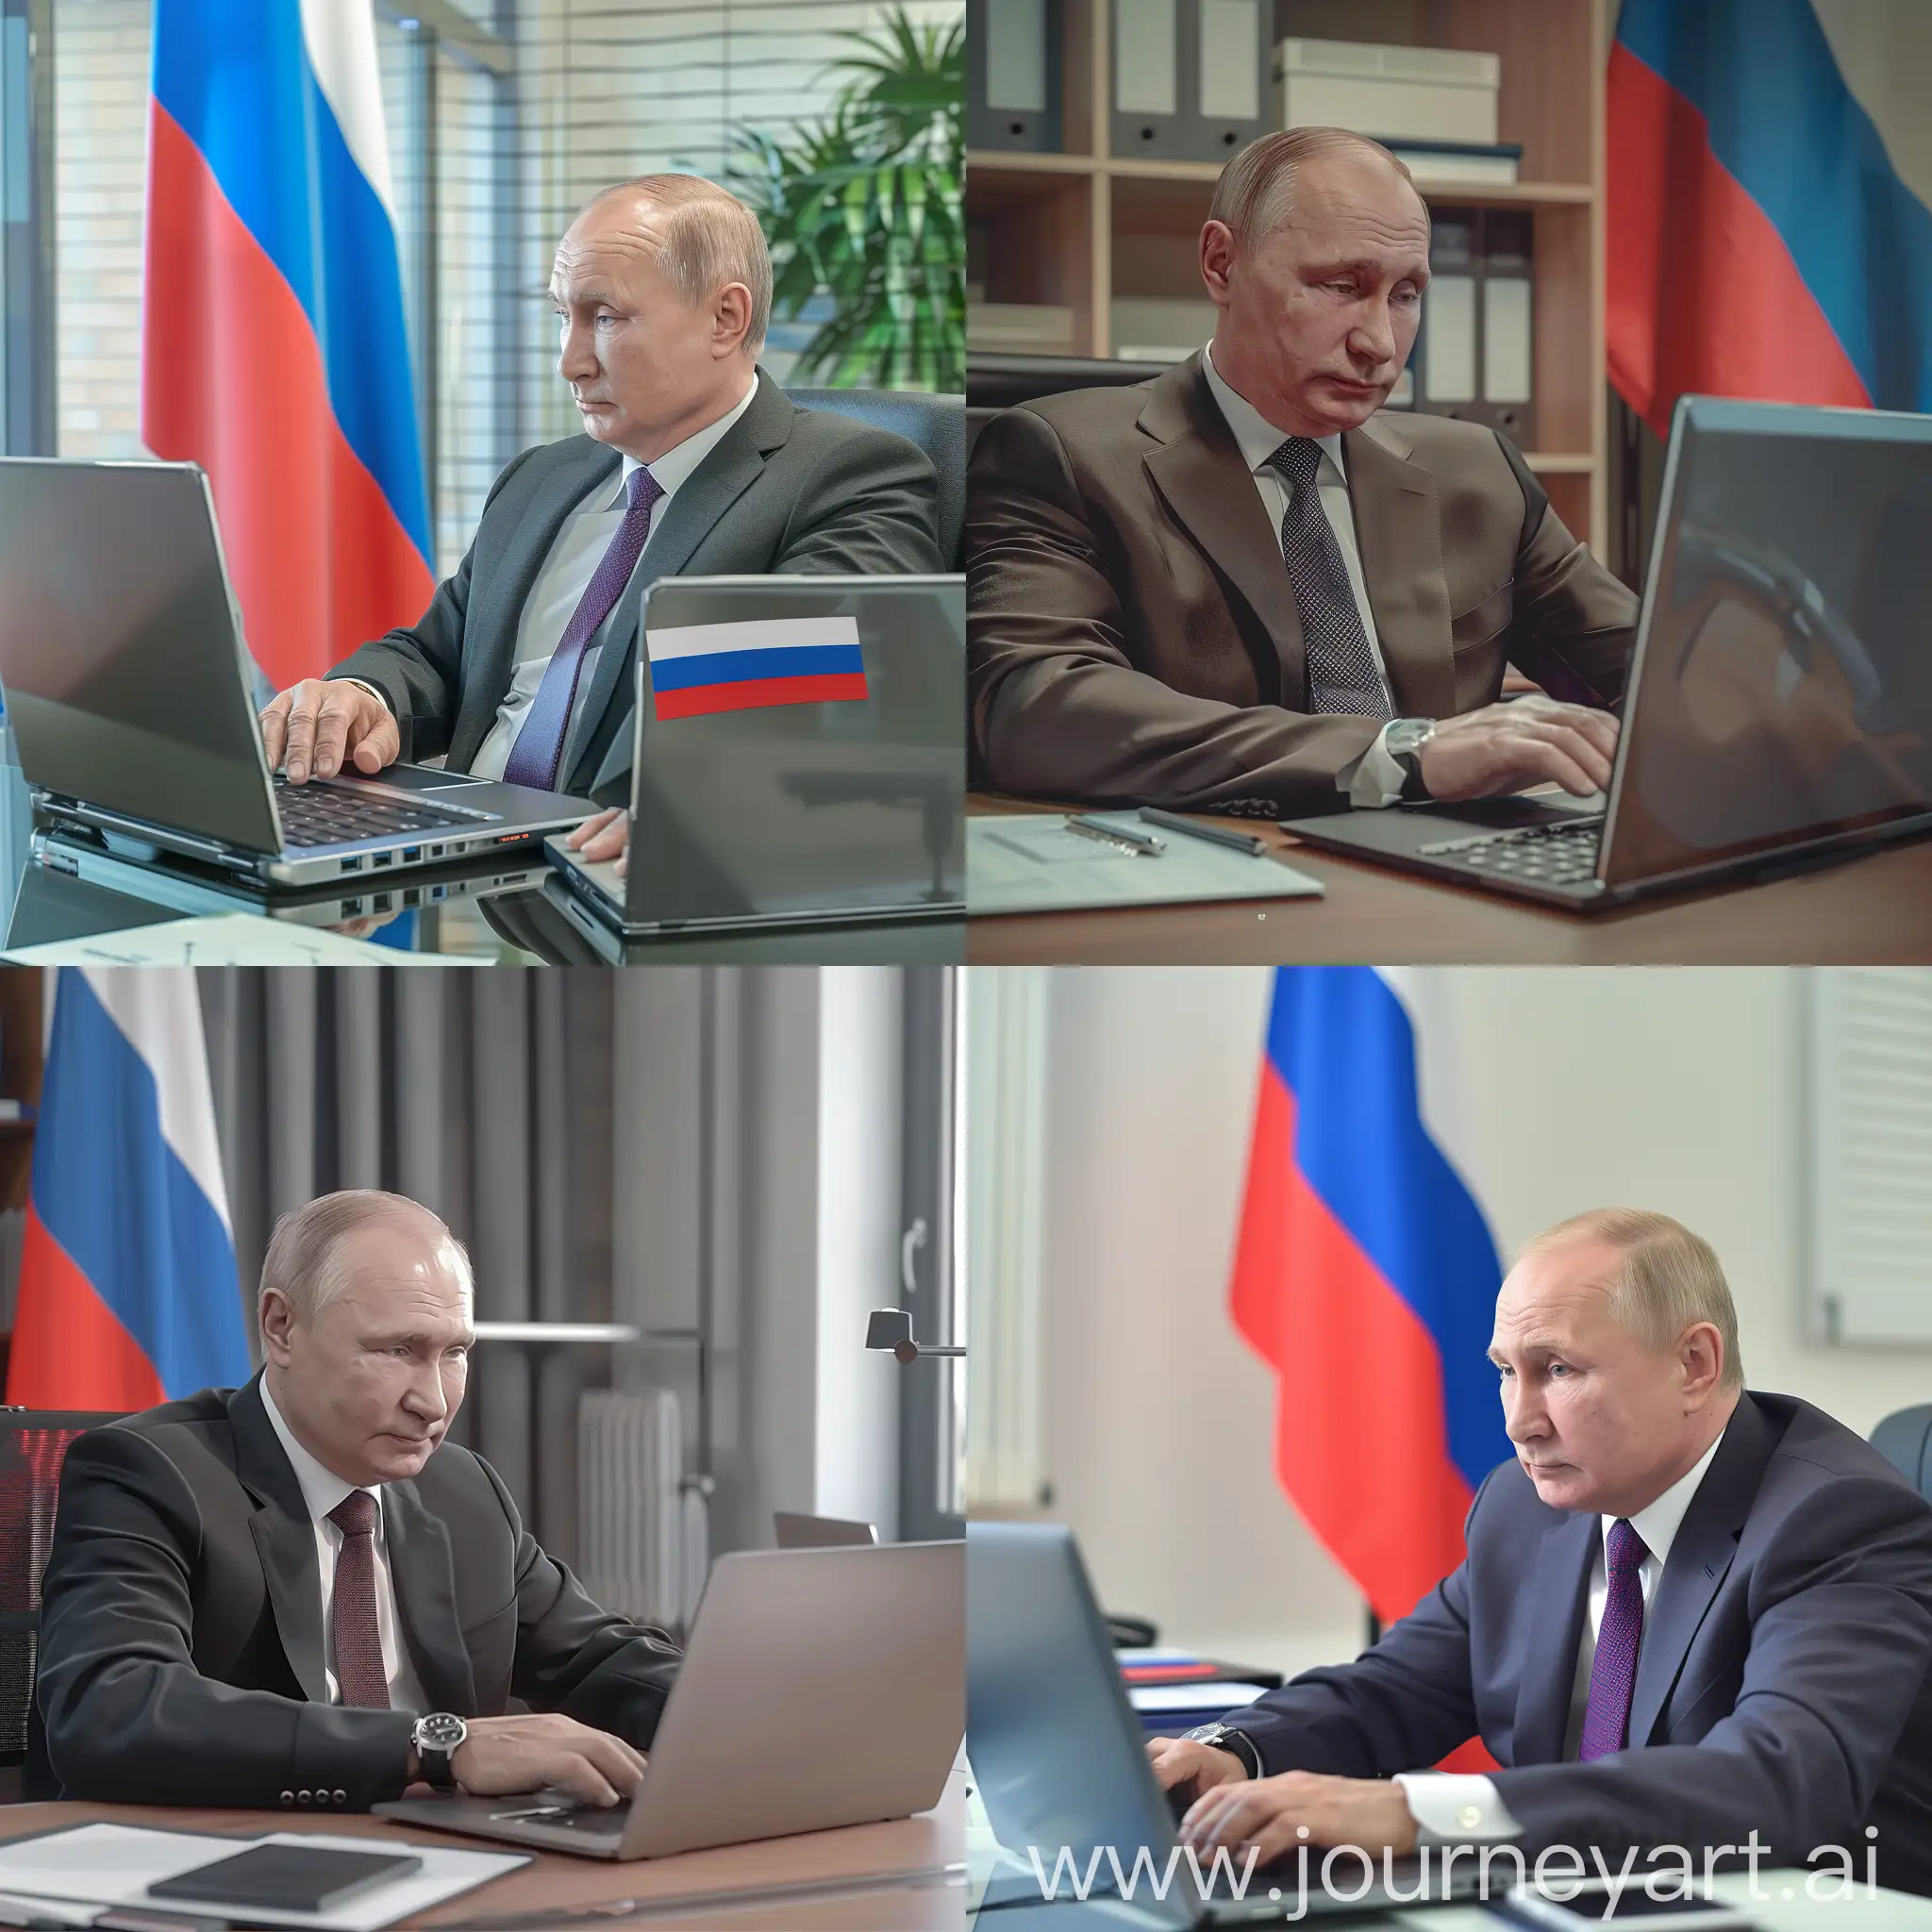 Vladimir-Putin-Working-at-Laptop-in-Office-with-Russian-Flag-Background